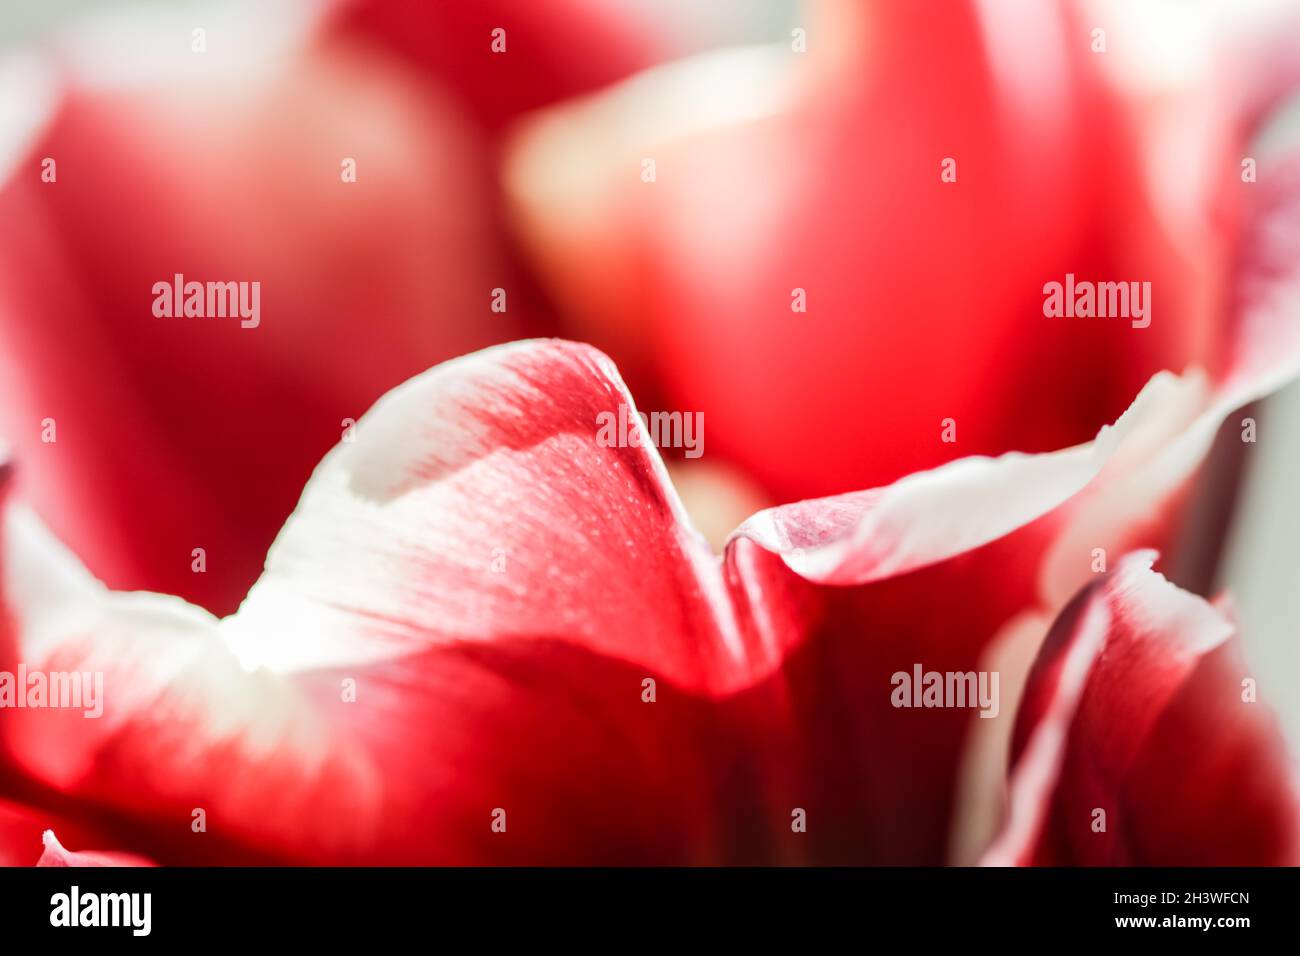 Abstract floral background, red tulip flower petals. Macro flowers backdrop for holiday brand design Stock Photo